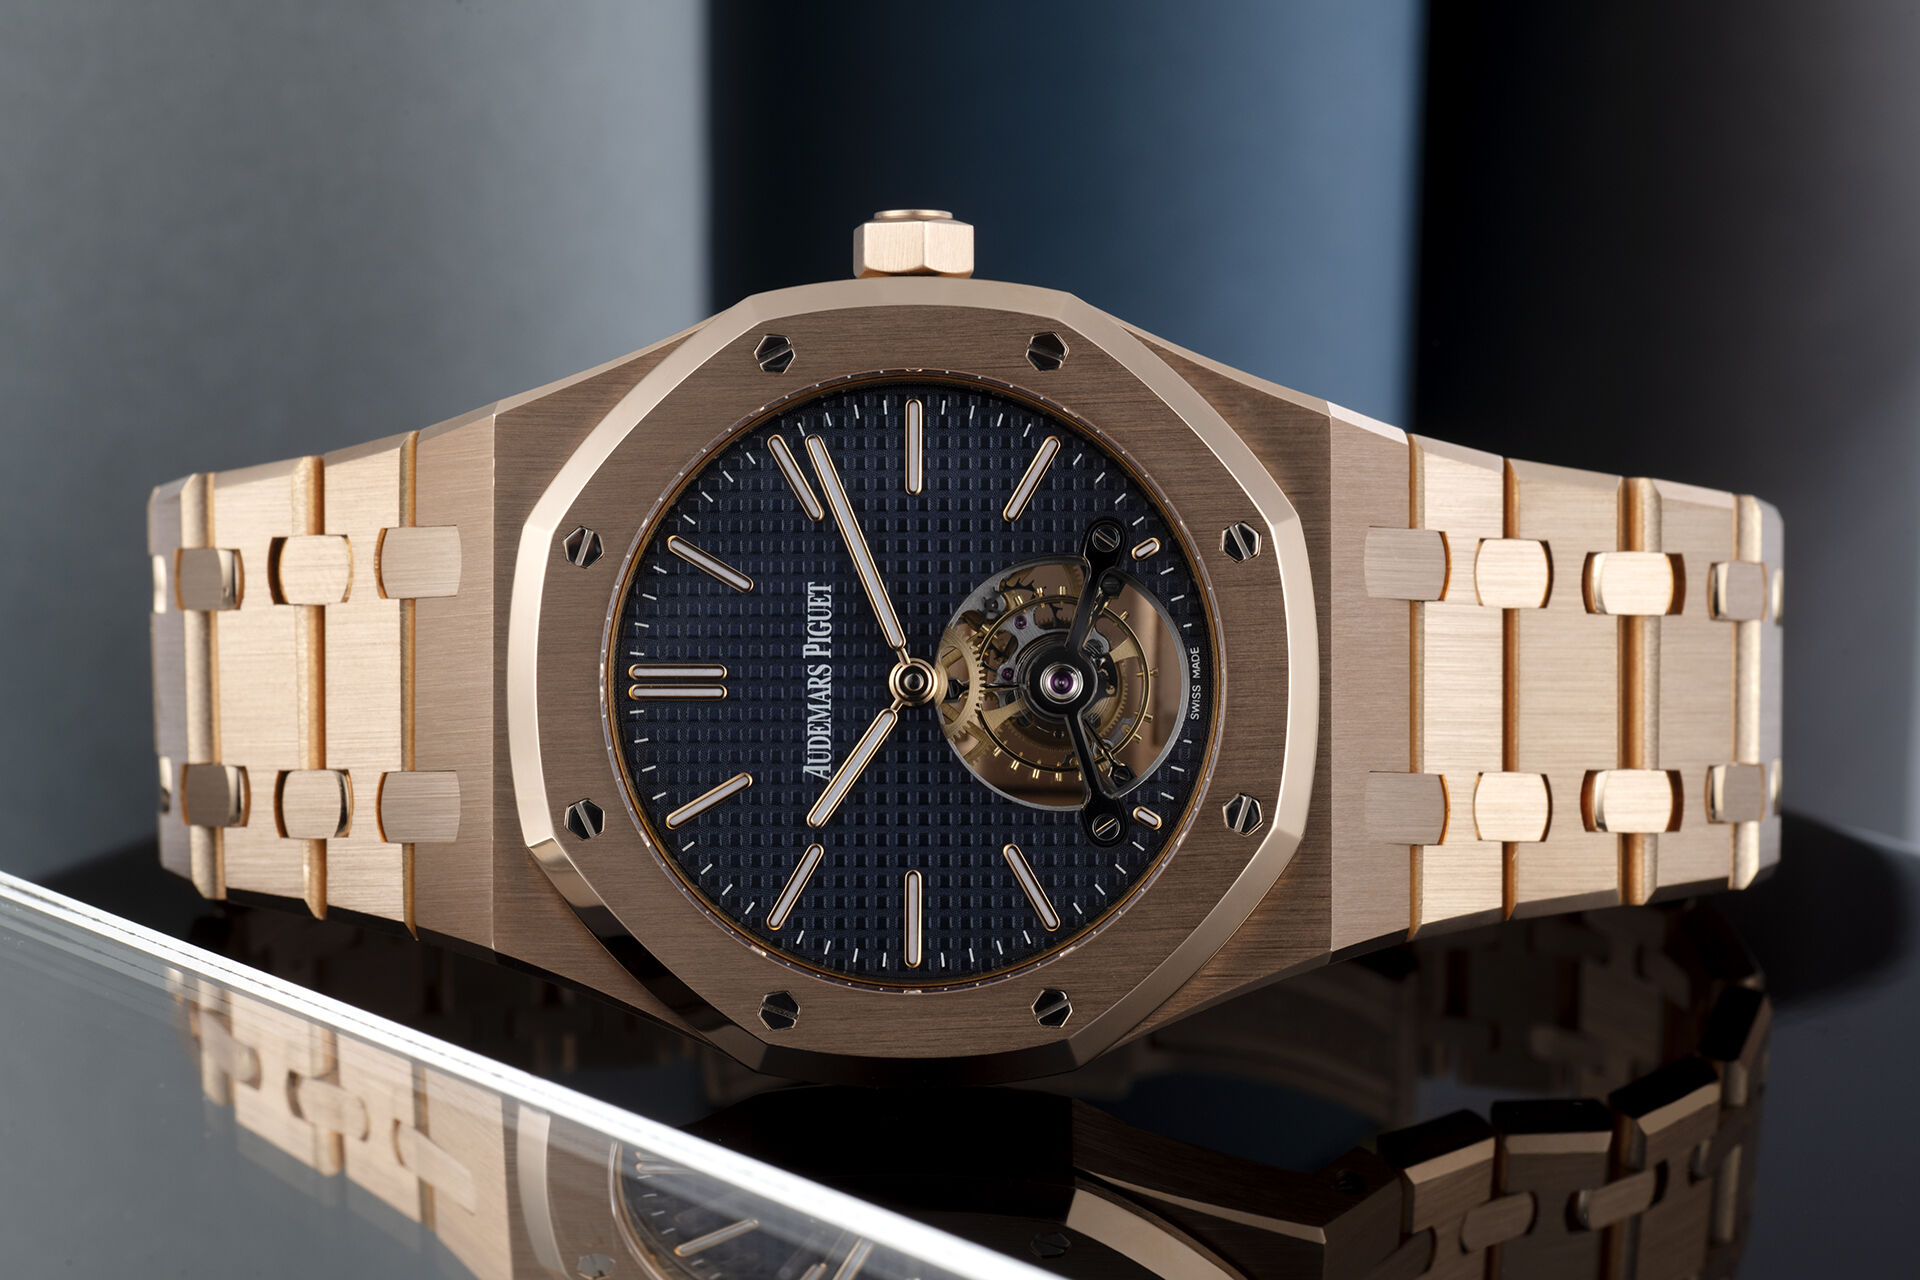 ref 26510OR.OO.1220OR.01 | Extra-Thin - 18ct Pink Gold | Audemars Piguet Royal Oak